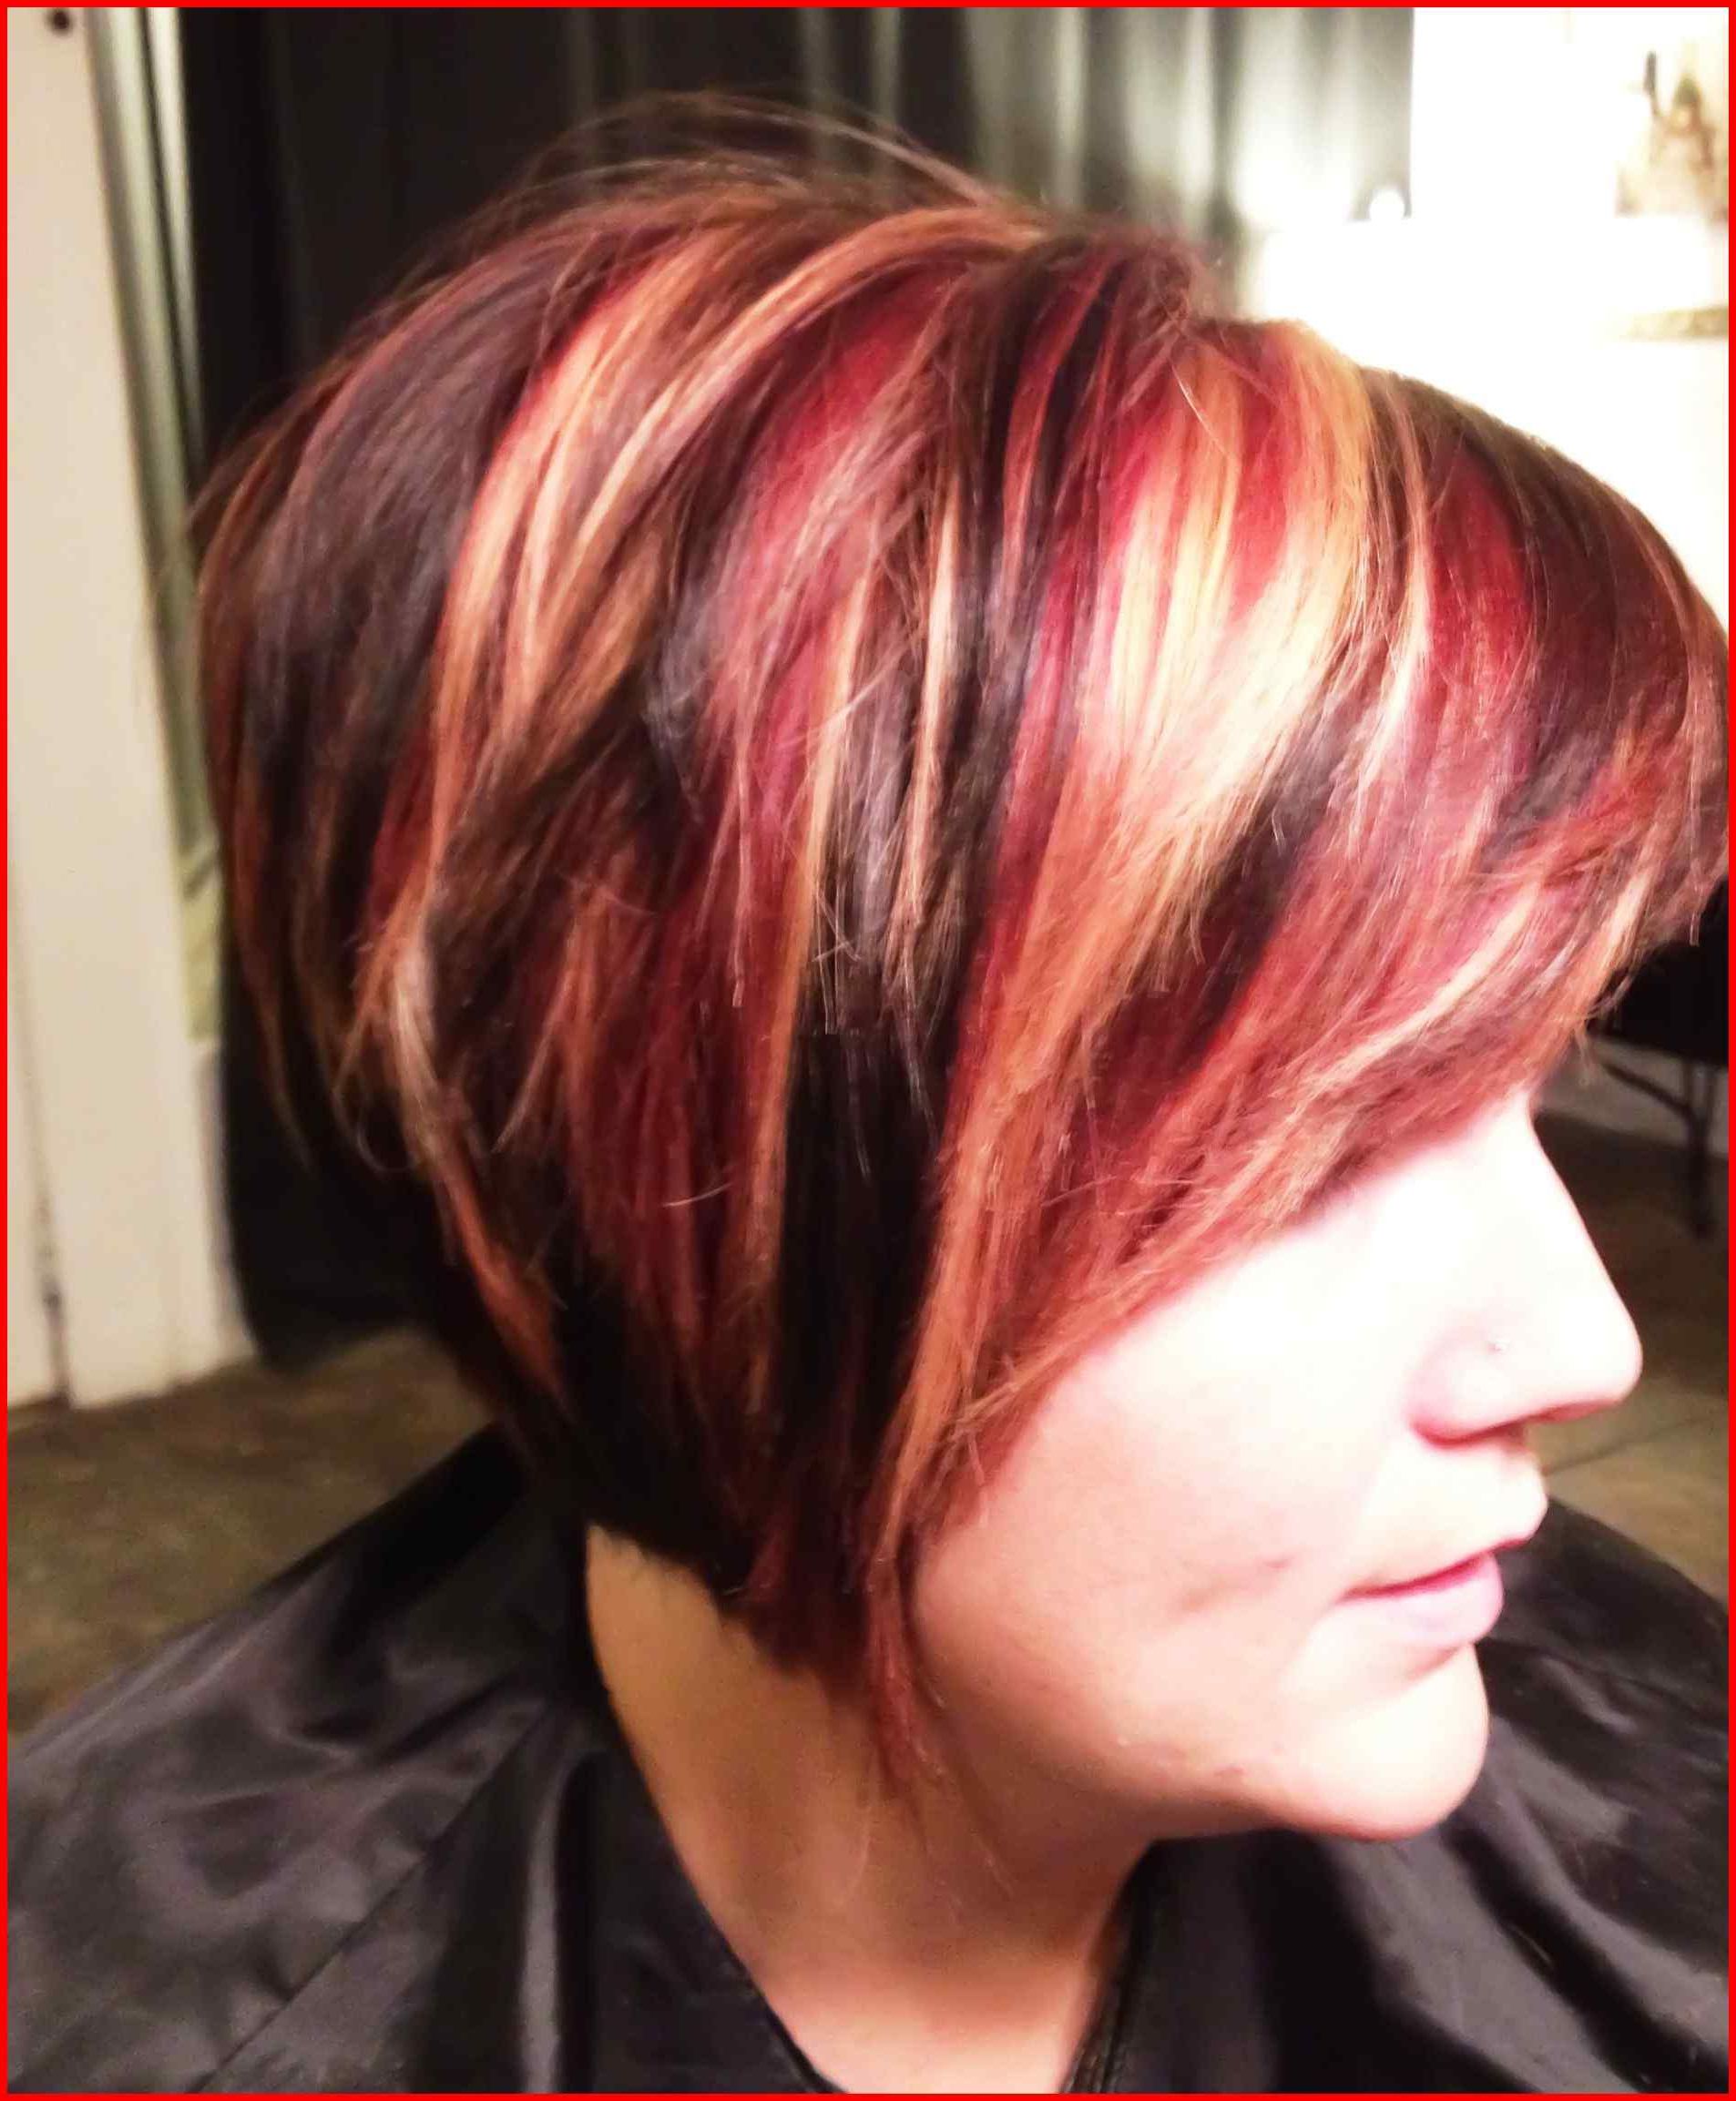 Fall Hair Color For Blondes Balayage Short Inspirational Fall Hair With Short Hairstyles With Red Highlights (View 17 of 25)